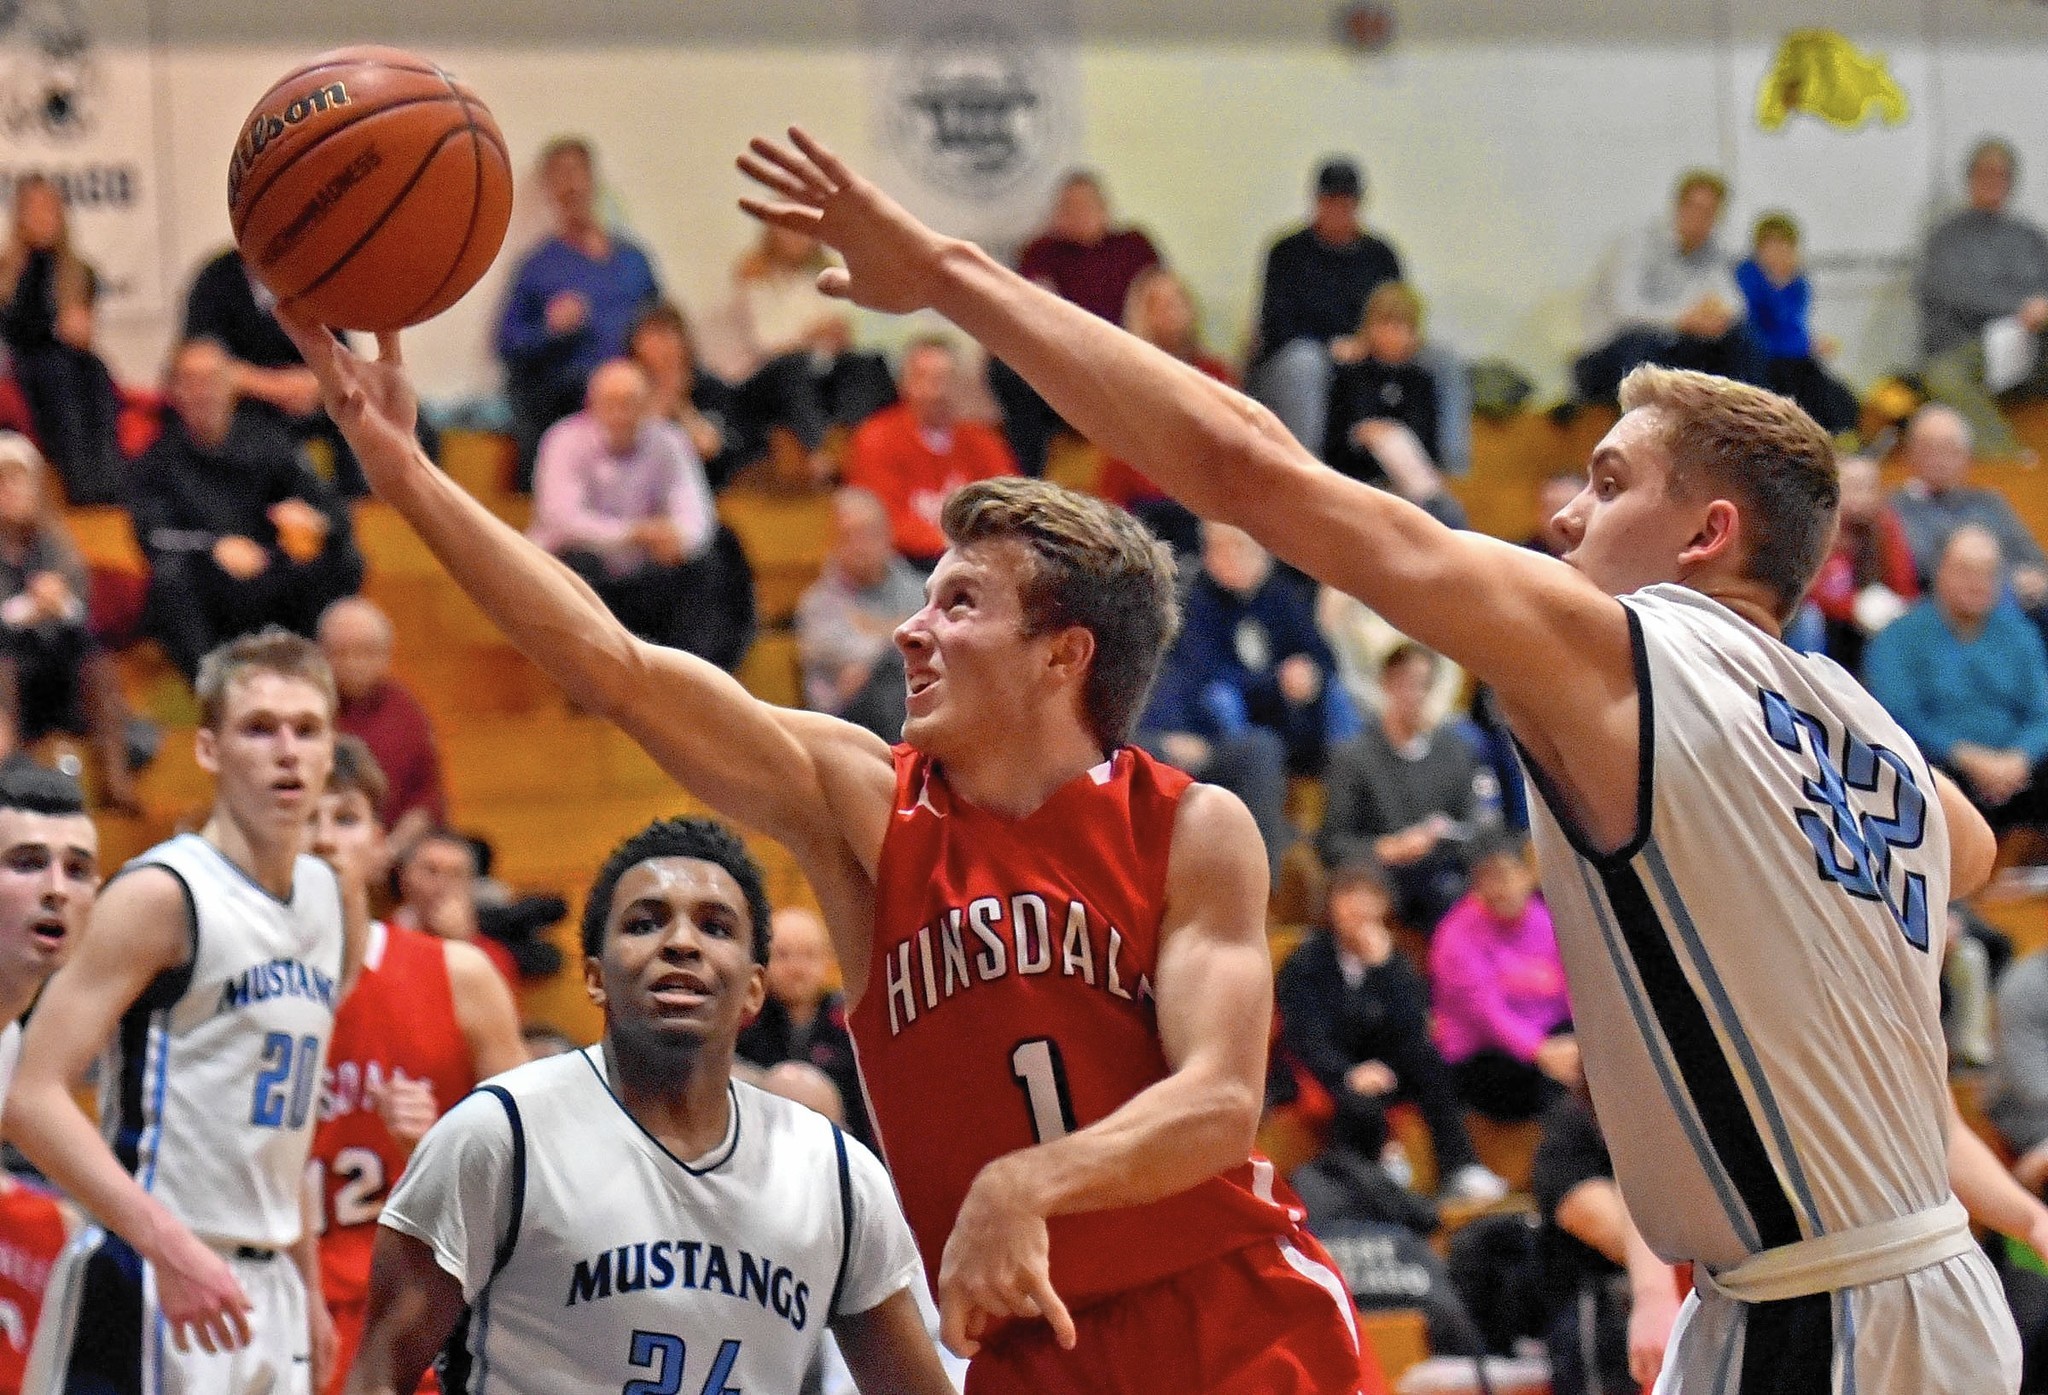 Hinsdale Central's Jack Hoiberg to walk on for Michigan State basketball - The Doings ...2048 x 1395